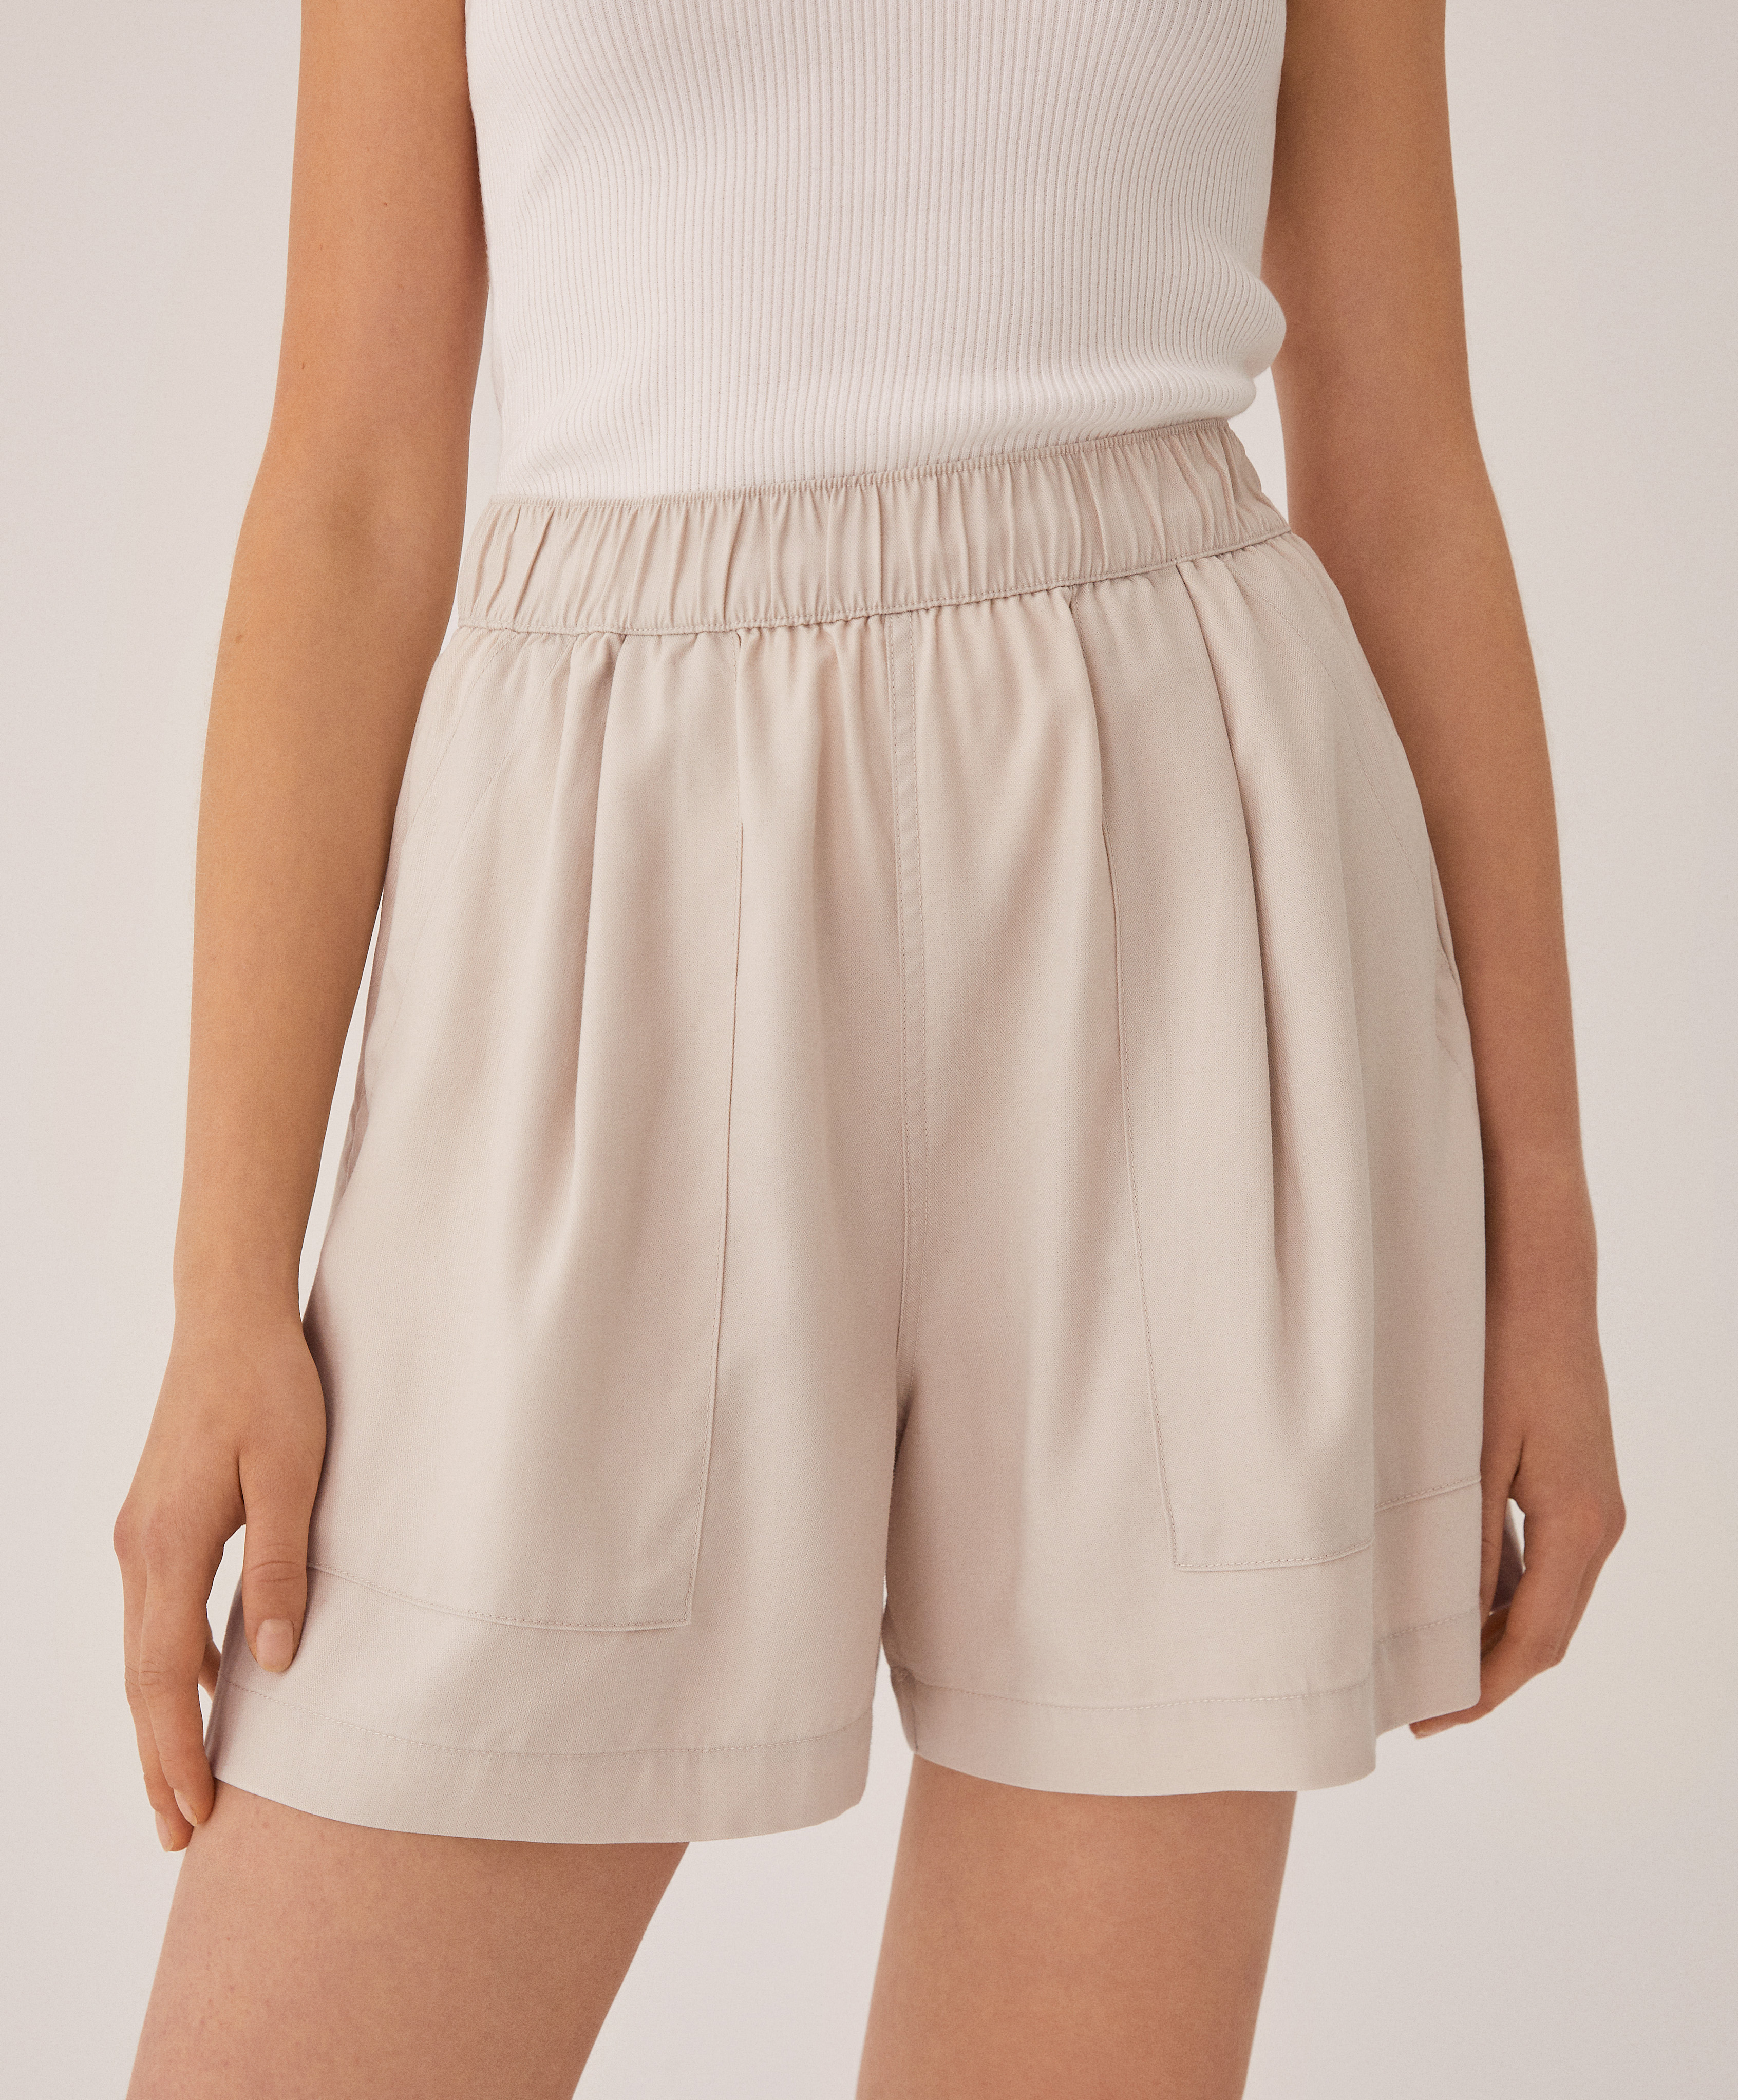 Soft touch lyocell shorts